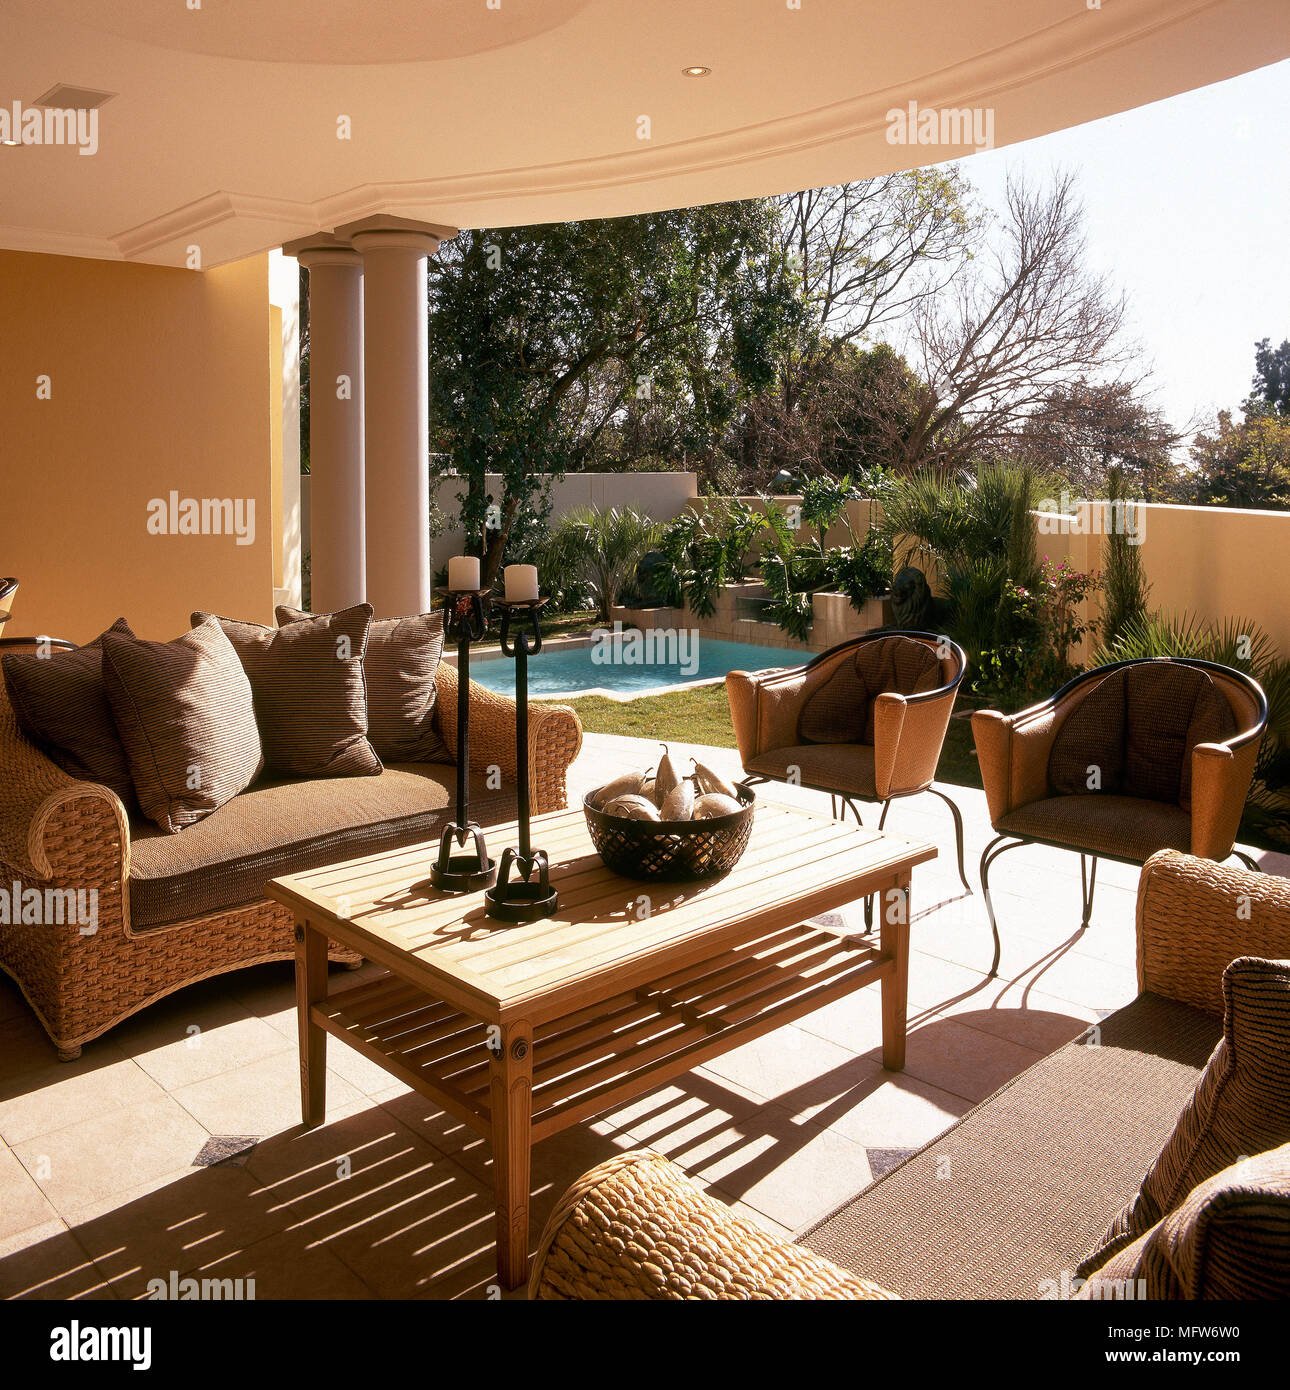 Tiled veranda with wicker seating arrangement, coffee table, and view of outdoor swimming pool and garden. Stock Photo